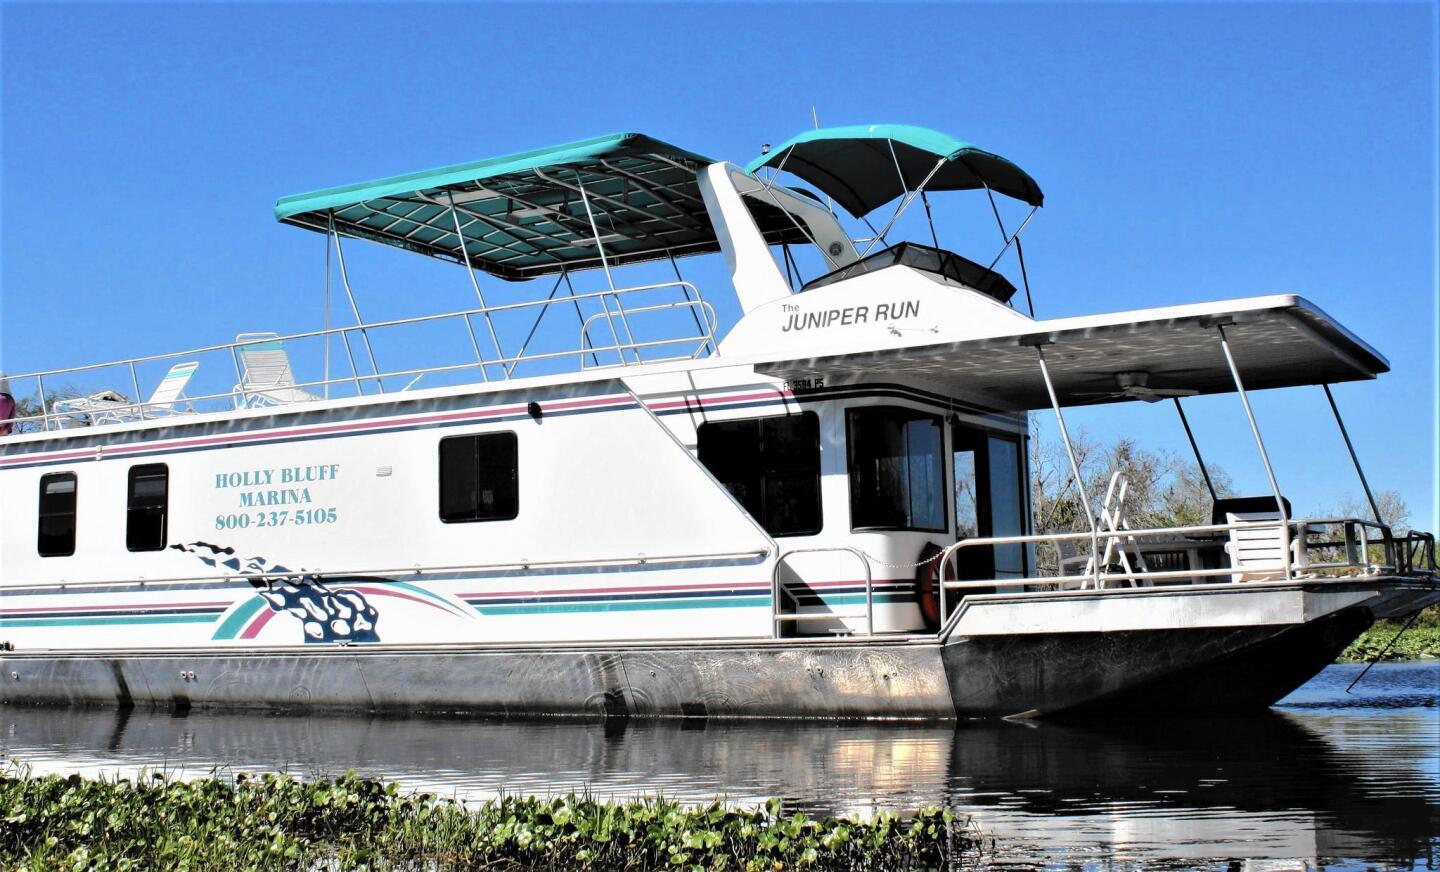 One of the houseboats for rent from Holly Bluff Marina in DeLand, Fla.